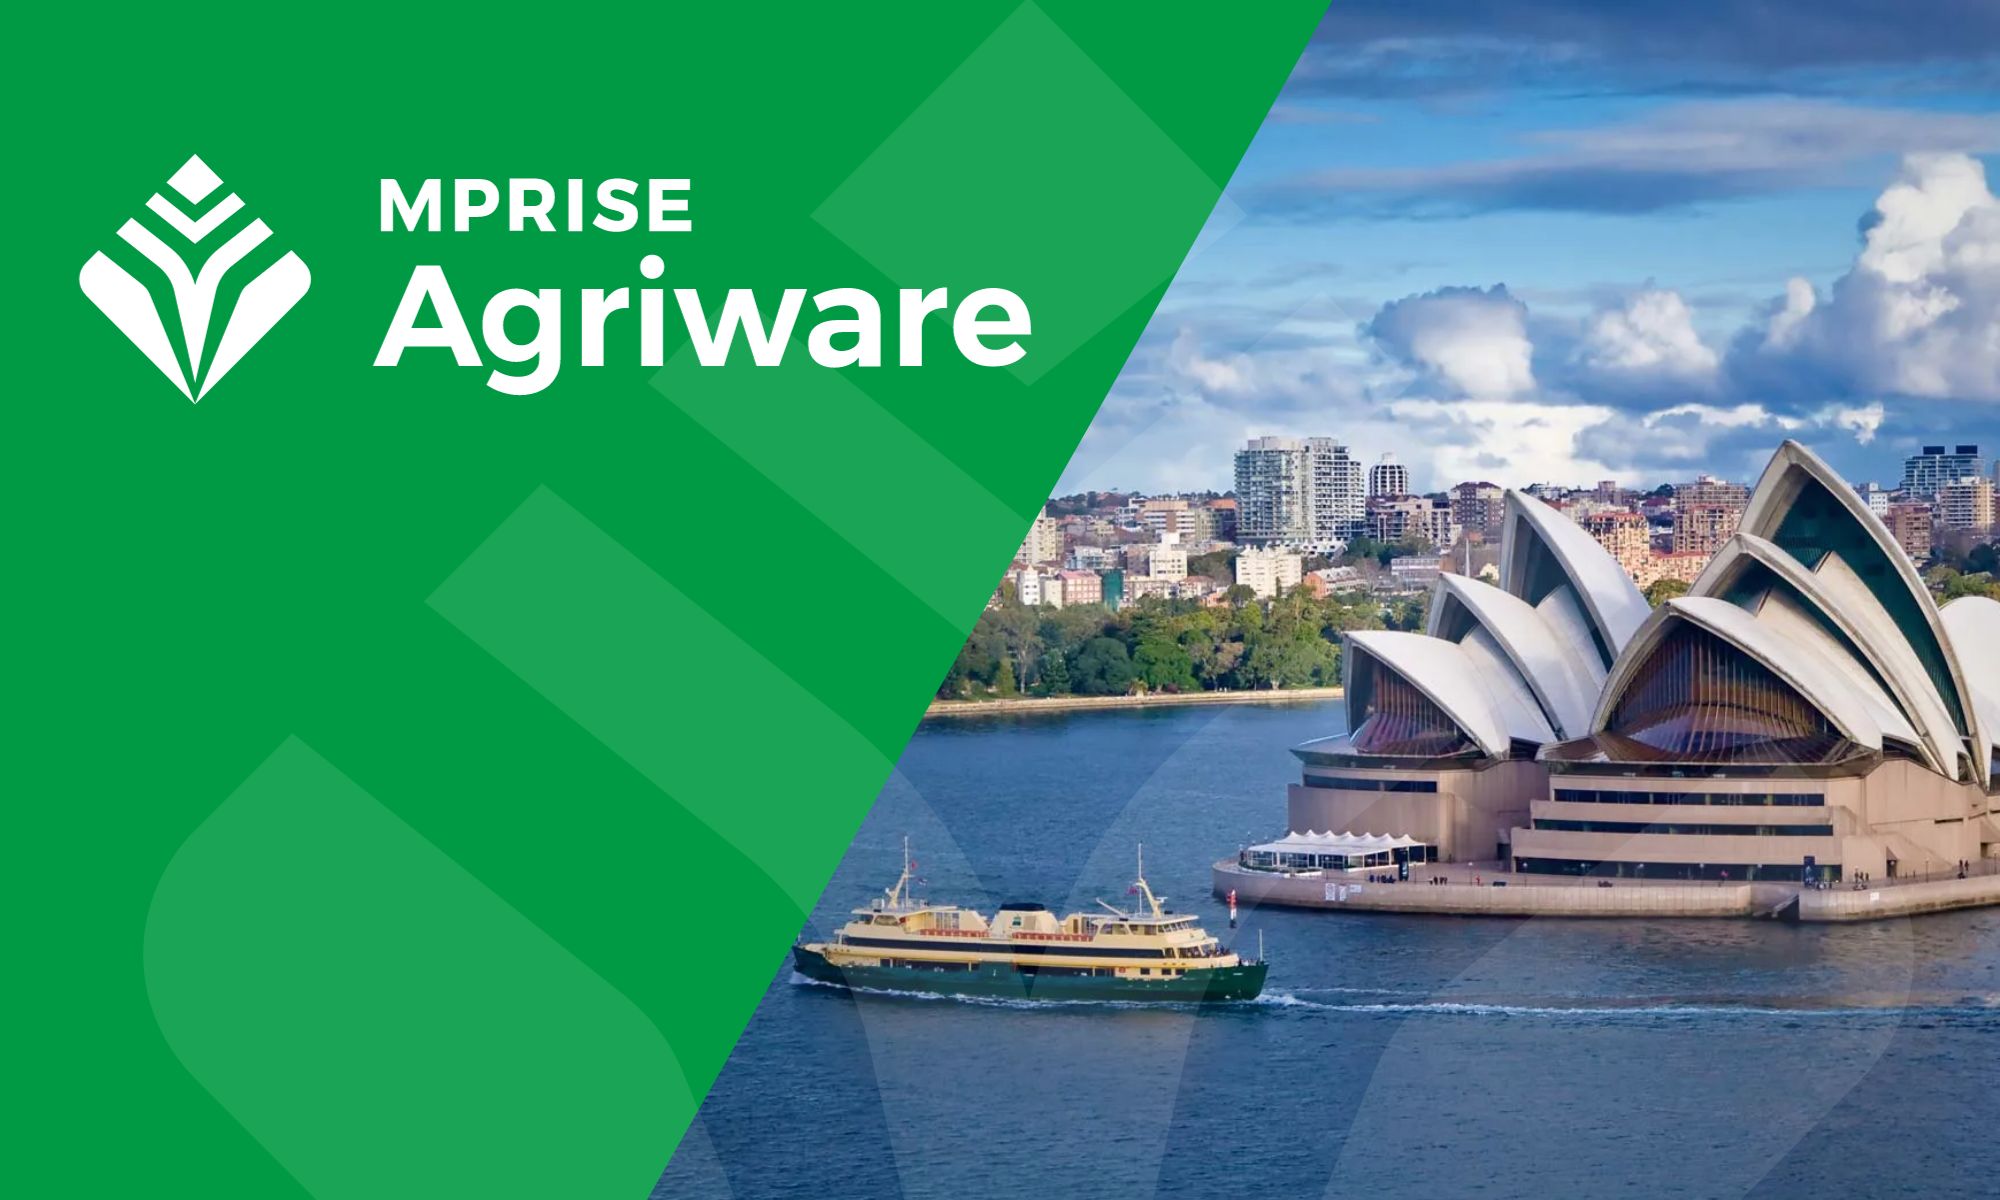 Mprise Agriware expands its local presence in Australia and New Zealand